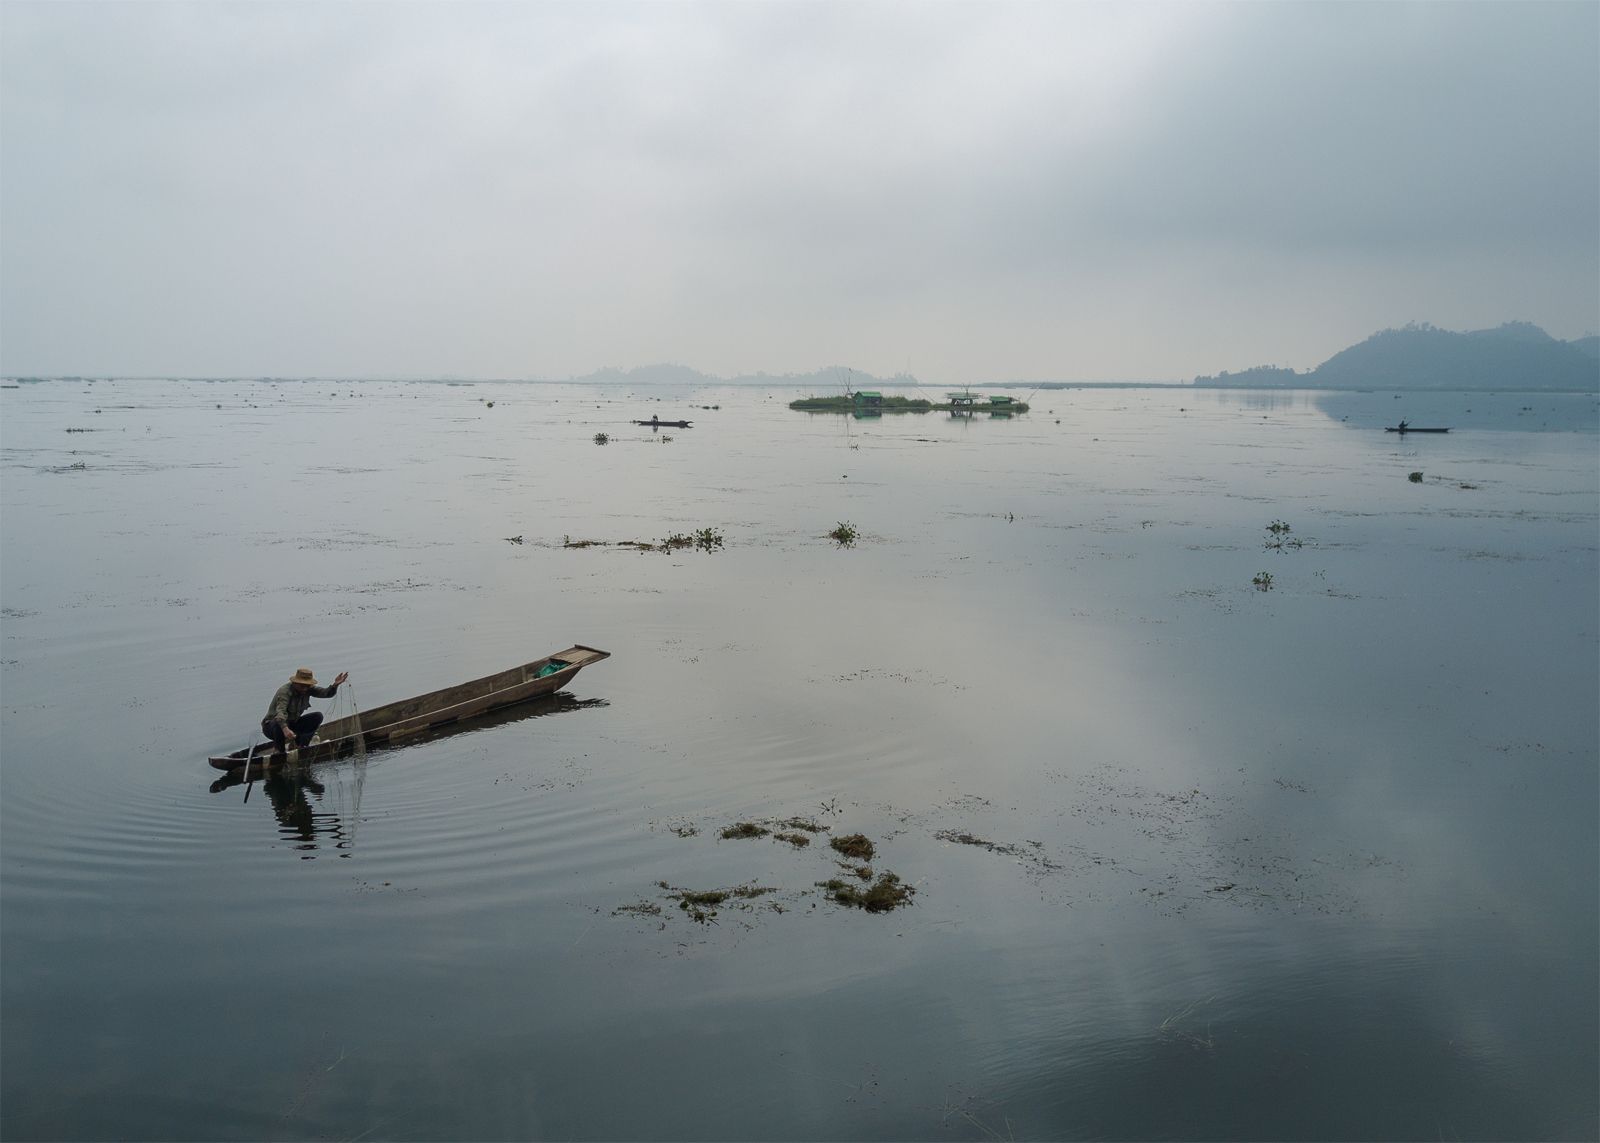 A Meitie fisherman fishes near phumshangs (floating huts) in Loktak Lake, Manipur. The construction of the Ithai Dam flooded over 80,000 hectares of farm and pasture land in the vicinity of the Loktak wetland. The Loktak Development Authority has been dredging the phumdis (floating biomass) and has cleared over 800 Phumshangs in the name of lake clean-up for efficient power generation. Image by Neeta Satam. India, 2017.